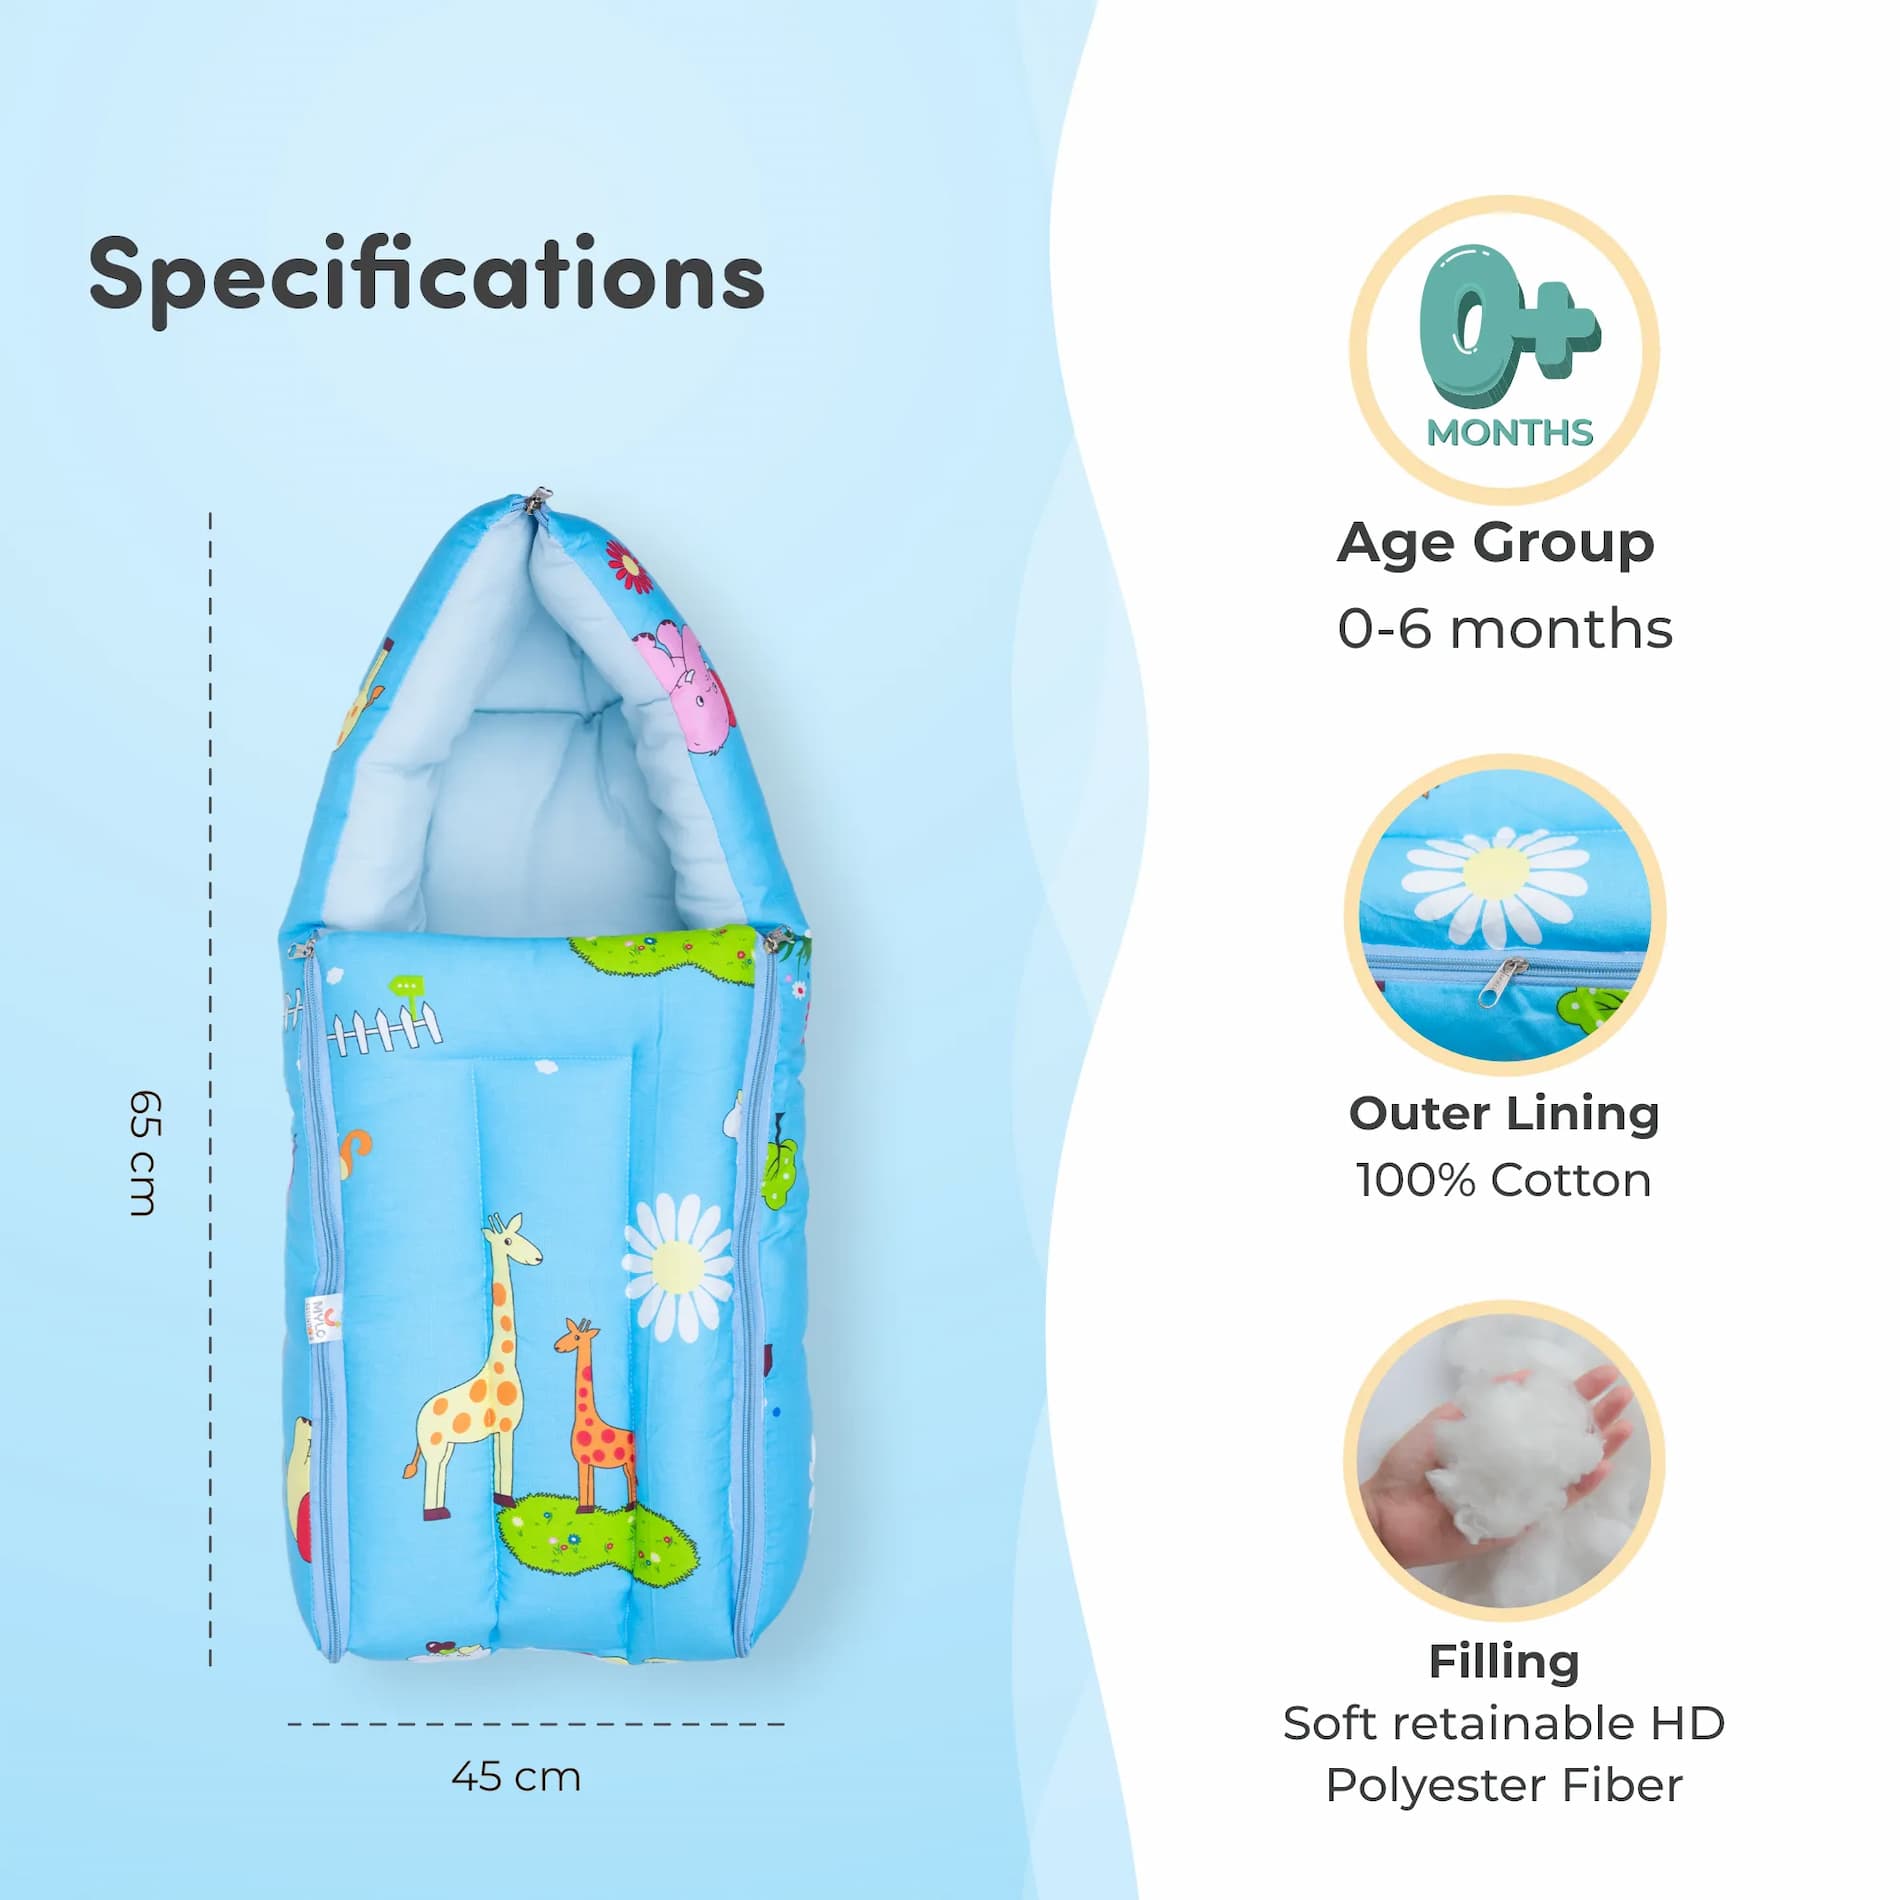 4–in-1 Soft & Snuggly Baby Sleeping Bag/ Carry Nest with 3-way Zip Opening- Jungle Safari 